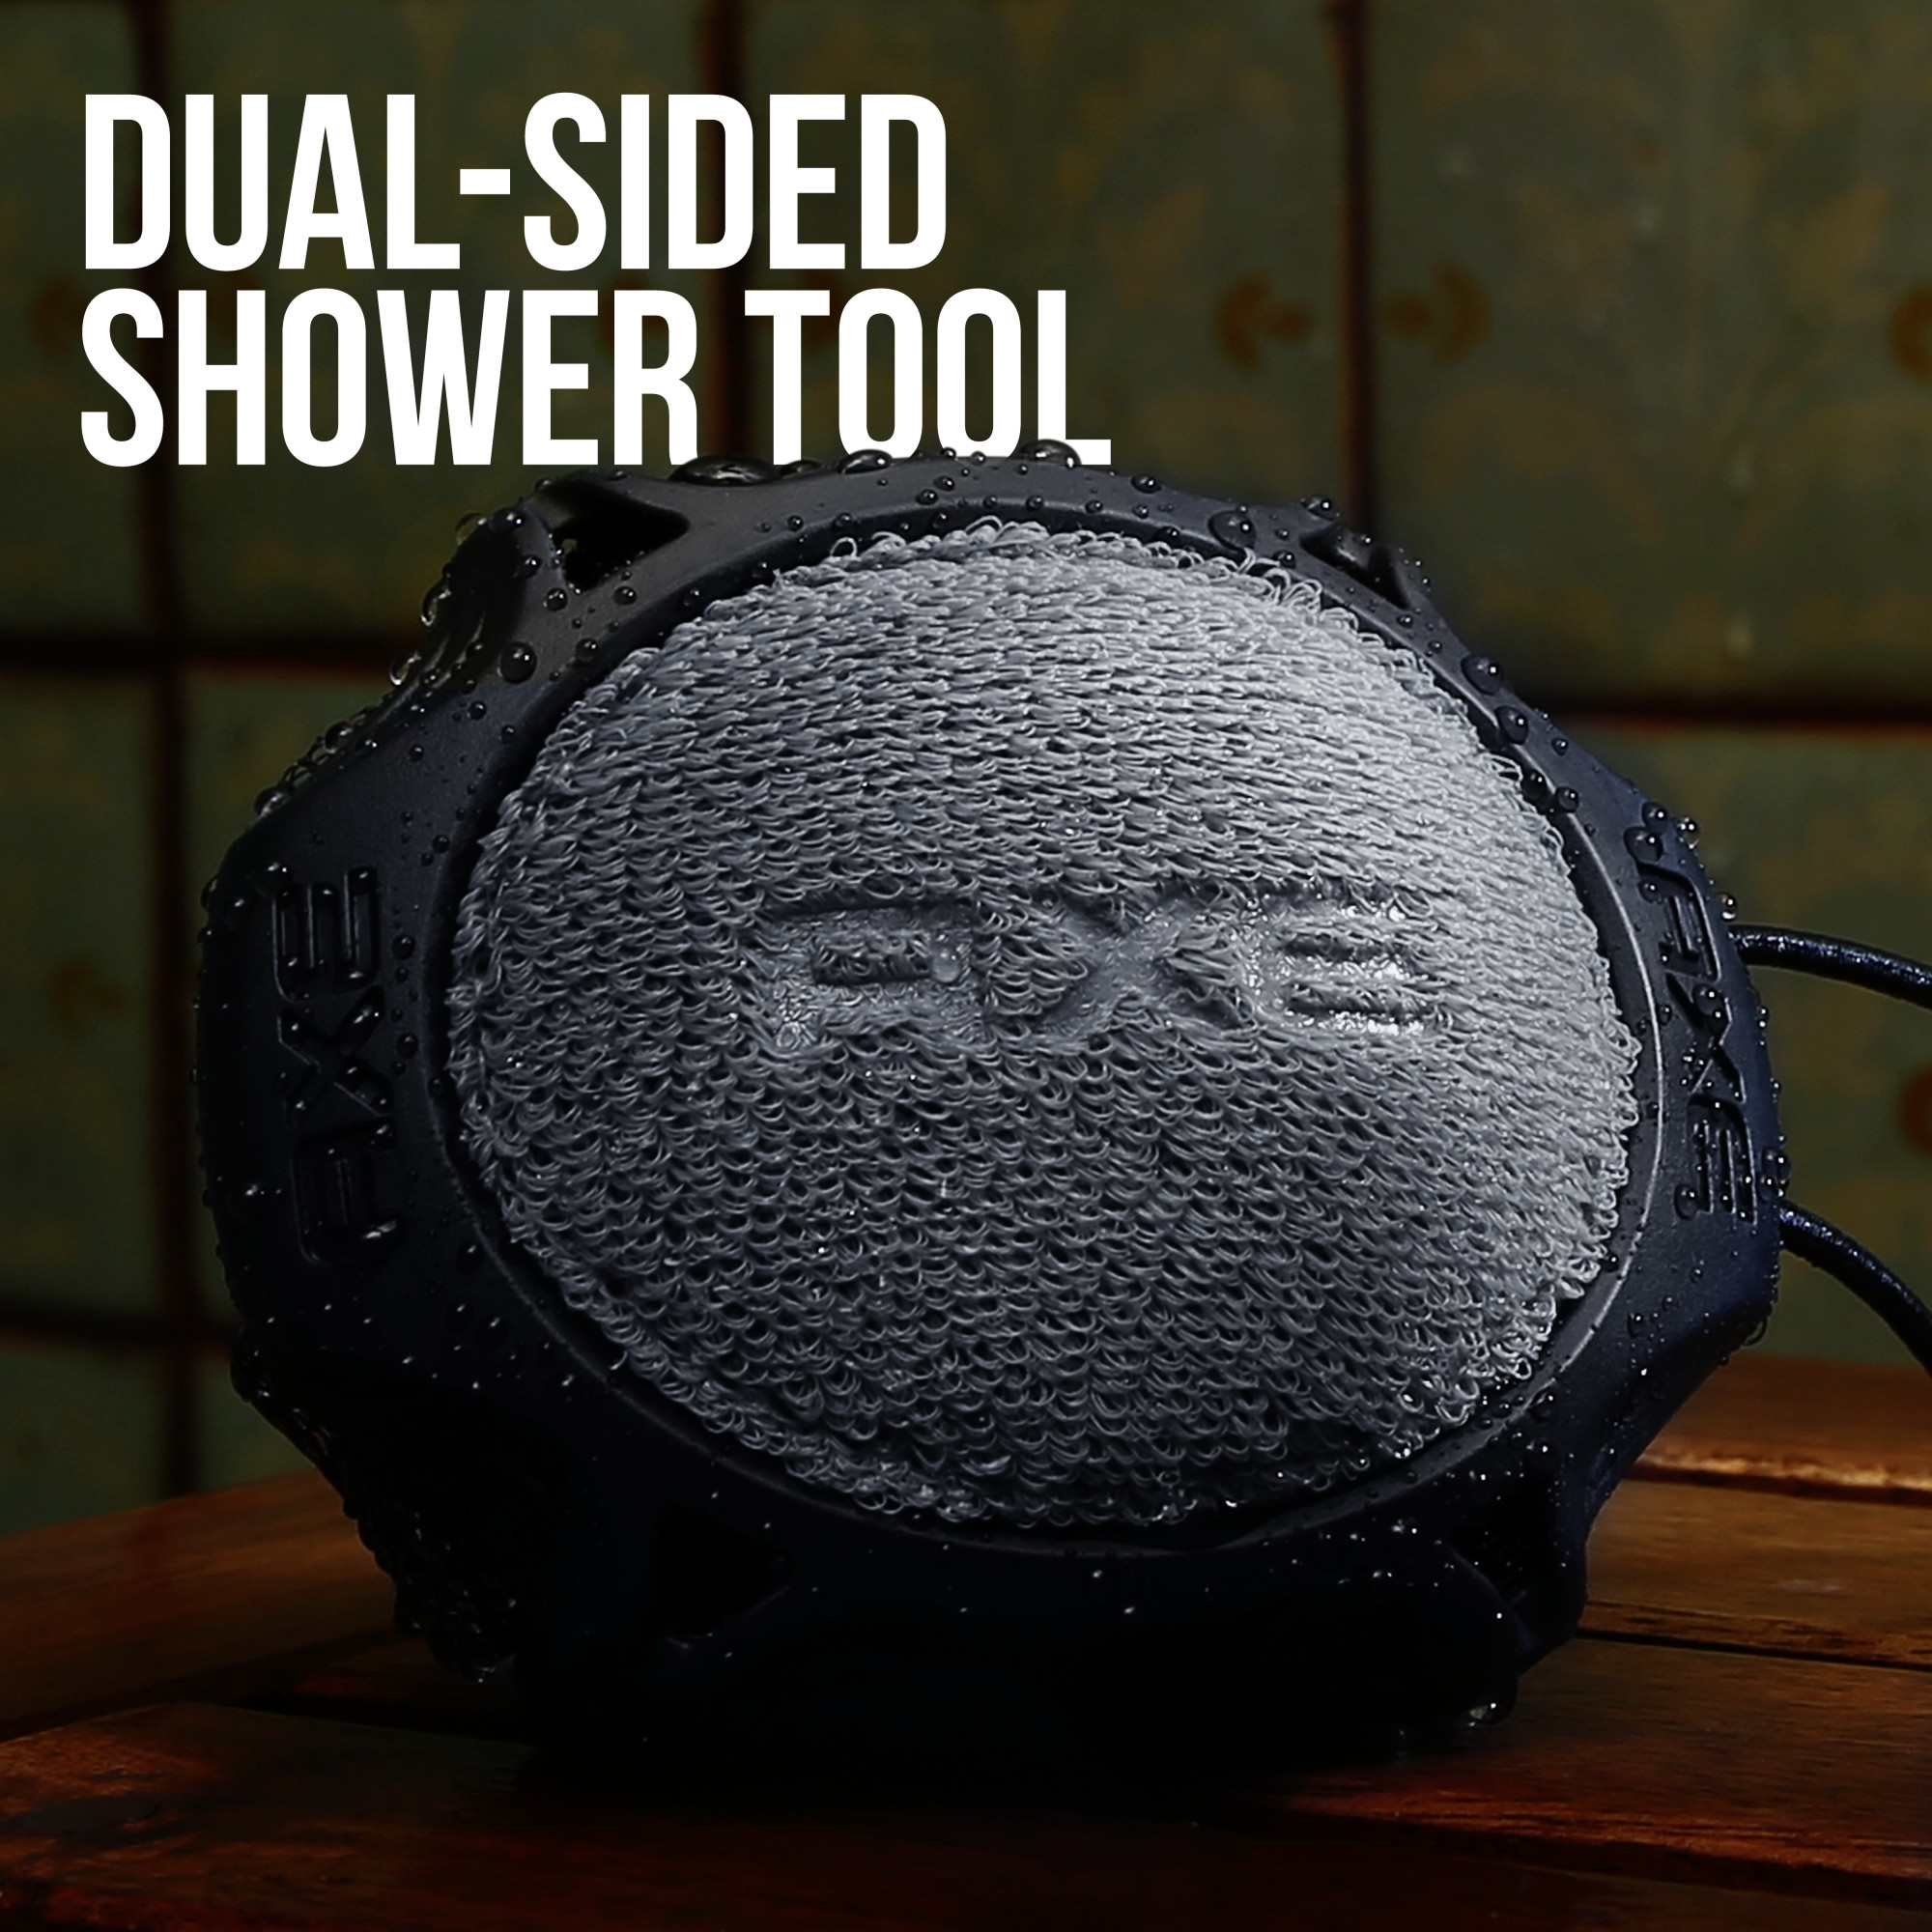 AXE Shower Tool Detailer Skin Cleanser Smoother Skin Exfoliates & Gently Cleanses One Size, 1 Count - image 4 of 11